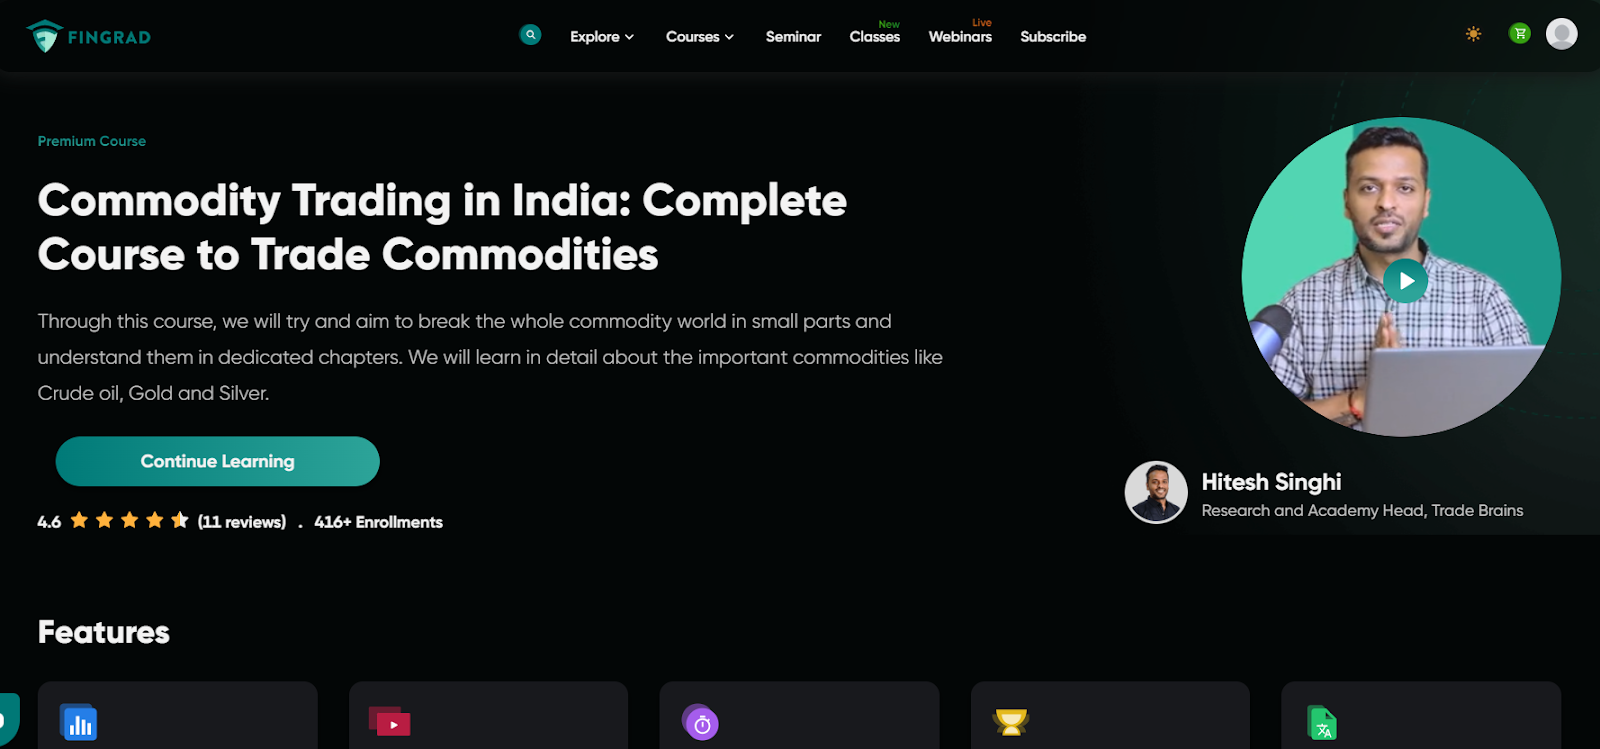 Best Commodity Trading Courses - Commodity Trading in India by FinGrad